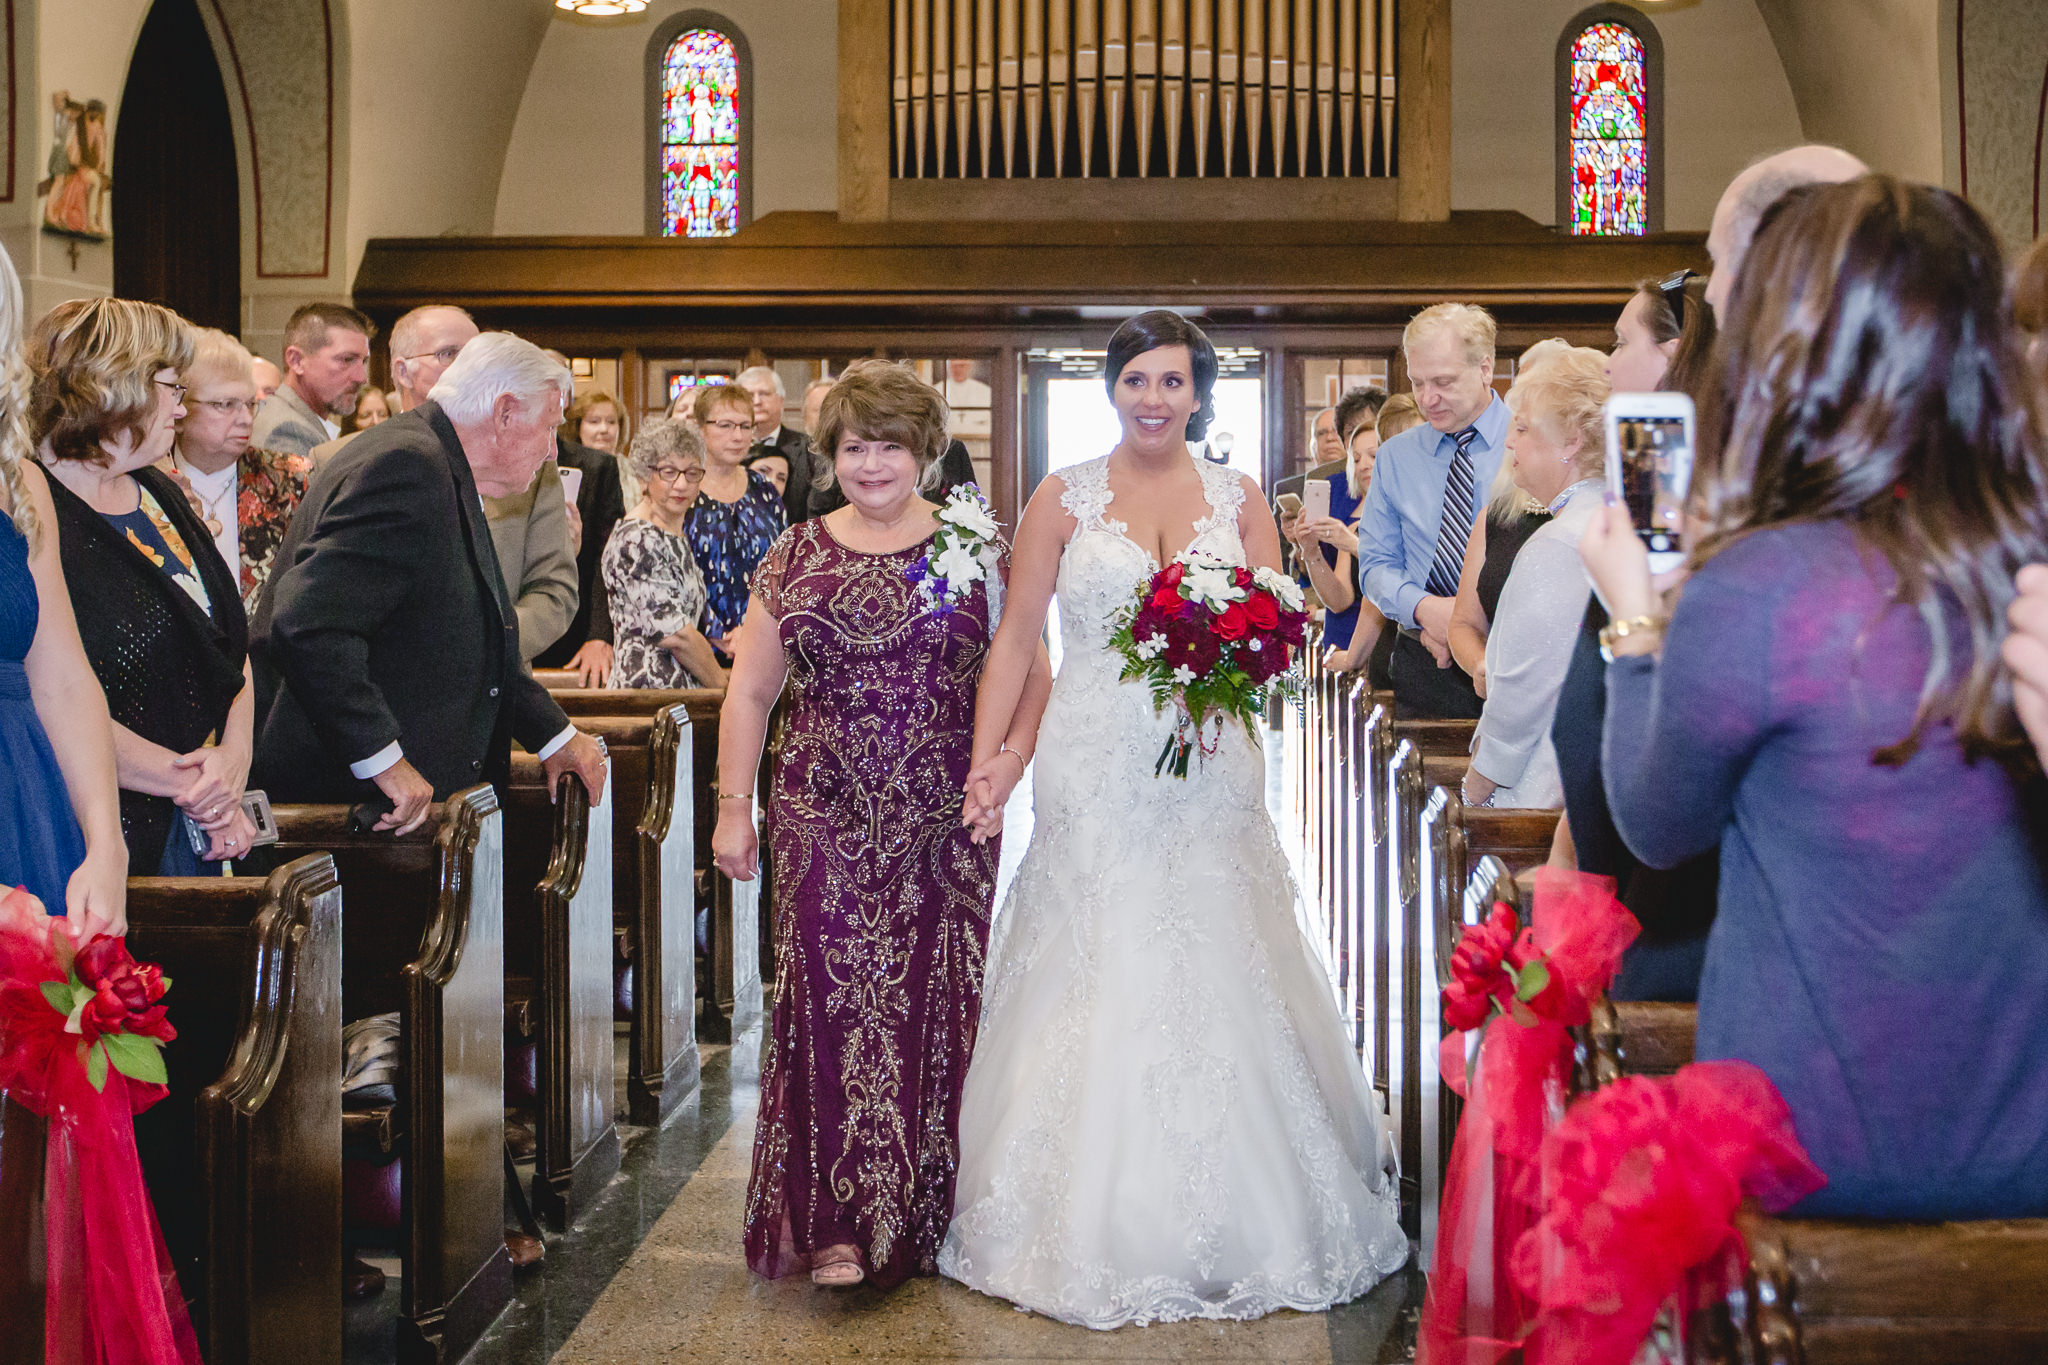 Mother of the bride walks her daughter down the aisle at St. John the Baptist